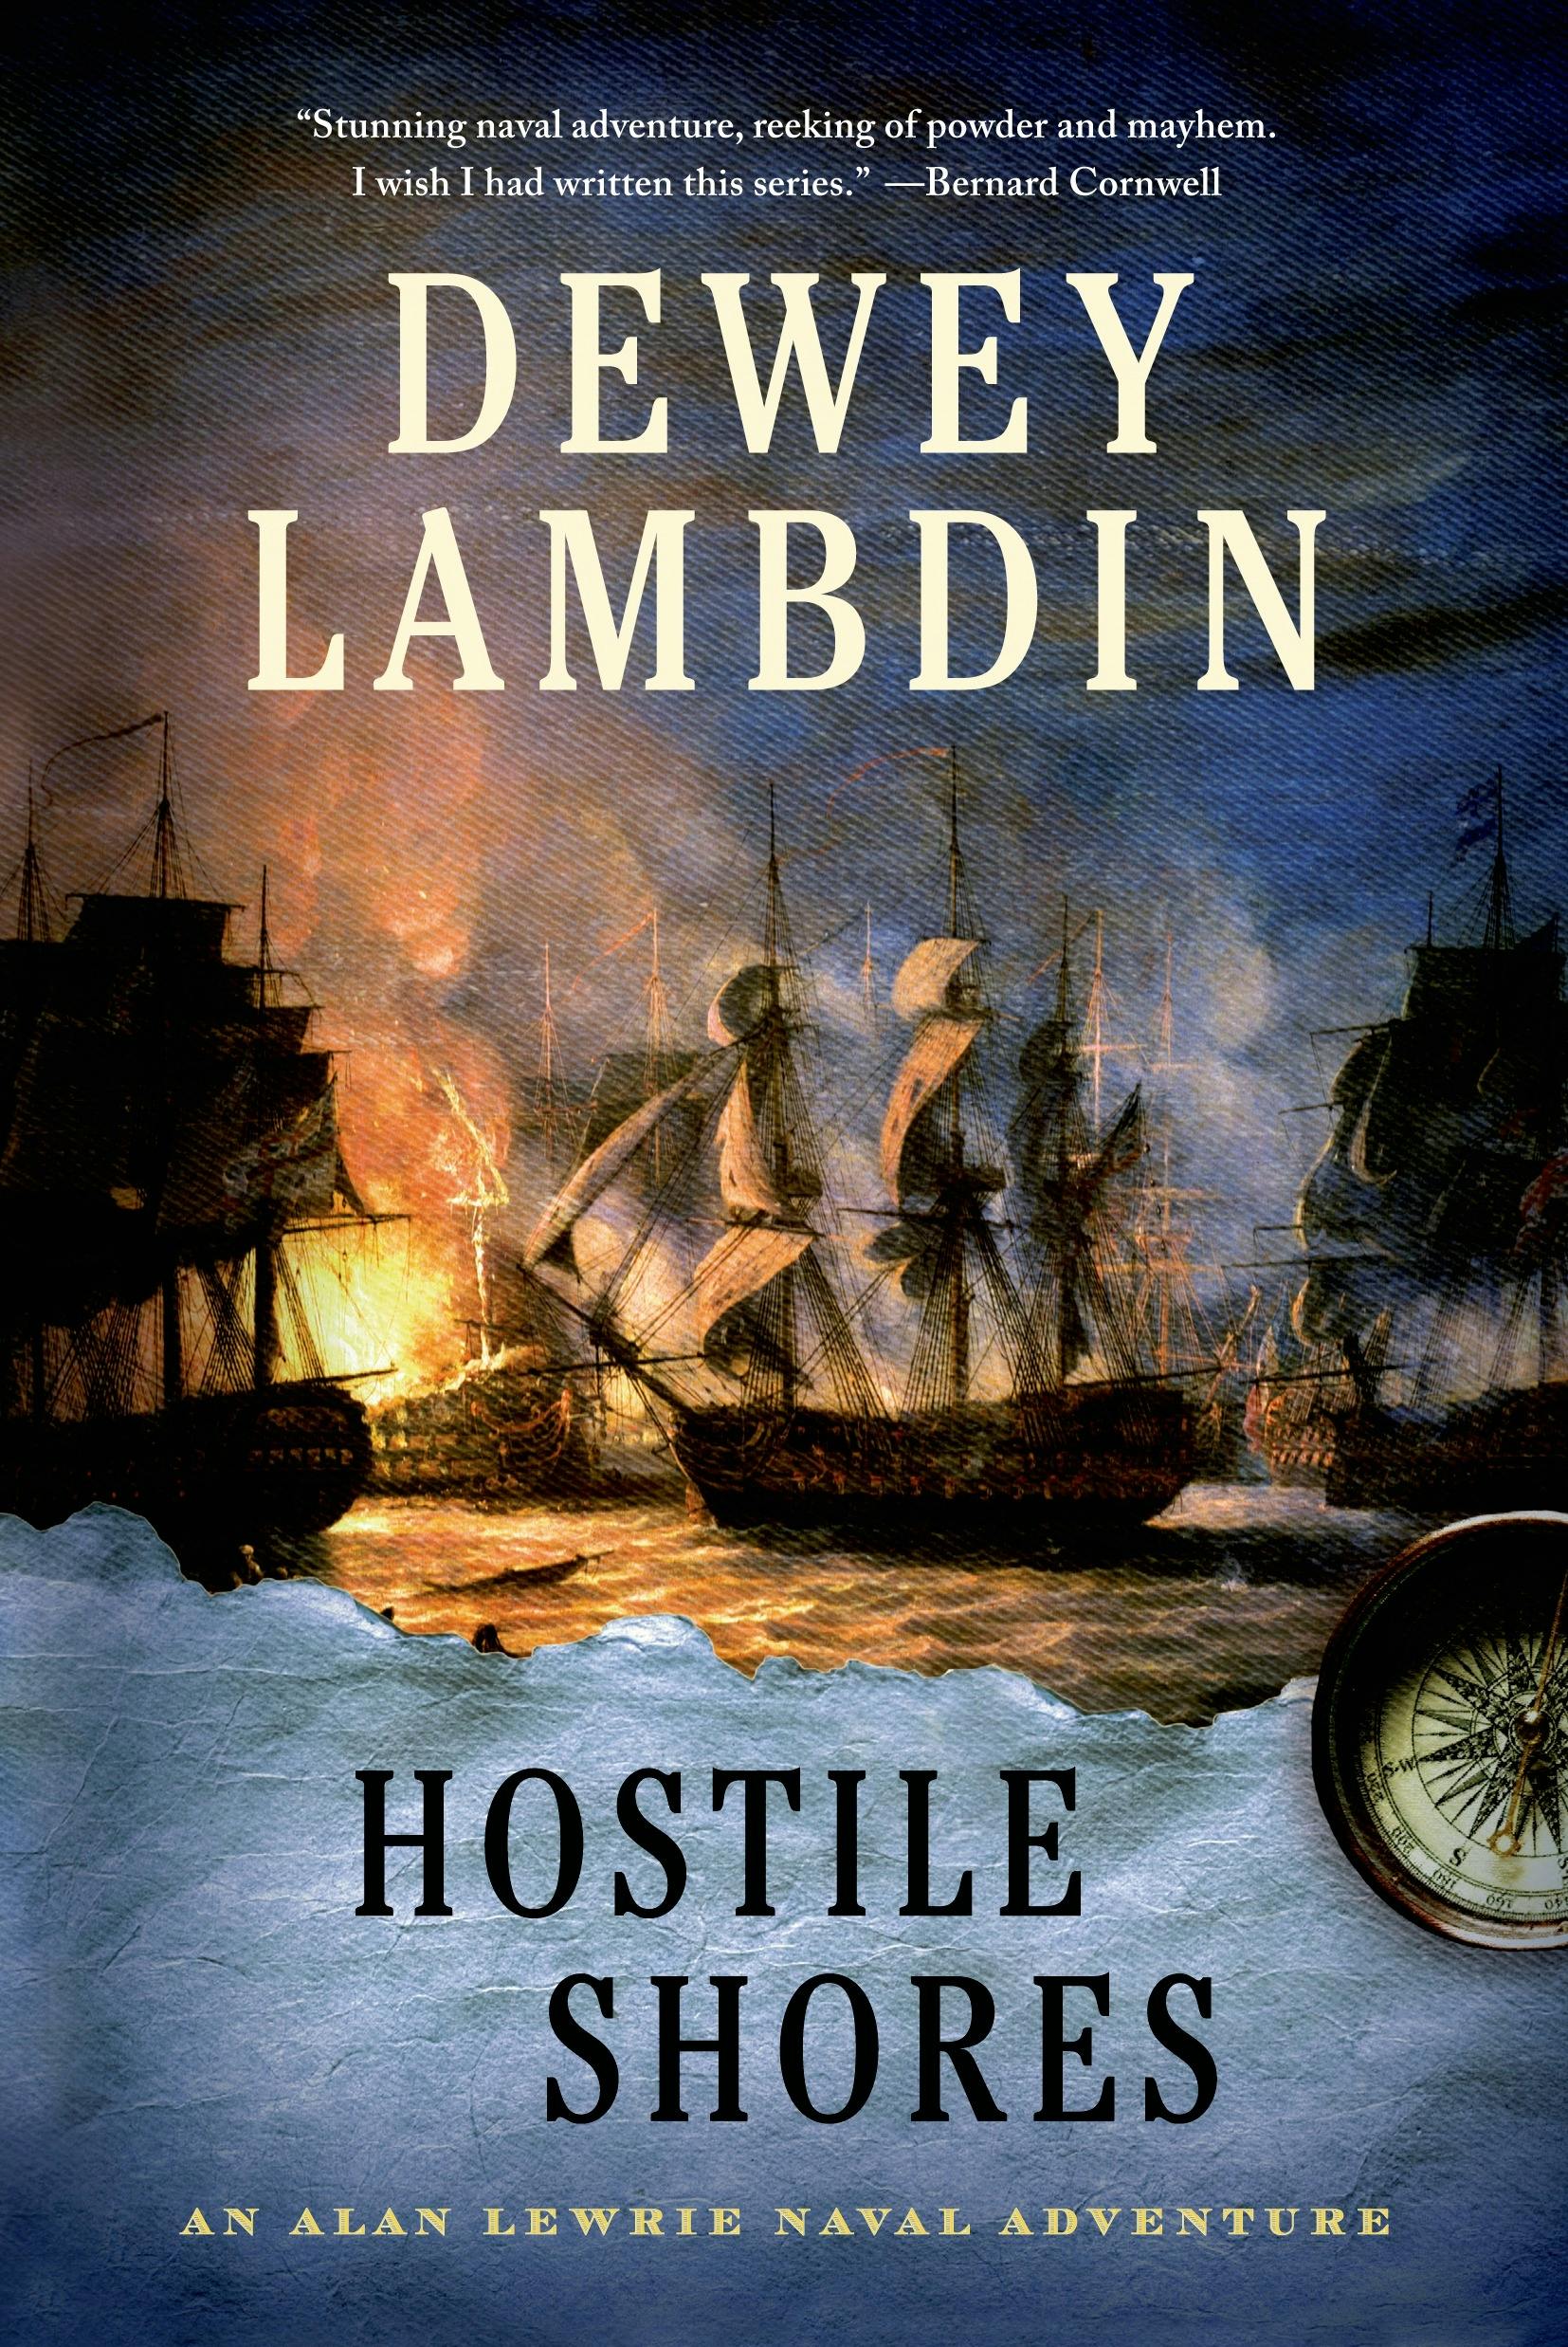 King, Ship, and Sword: An Alan Lewrie Naval Adventure (Alan Lewrie